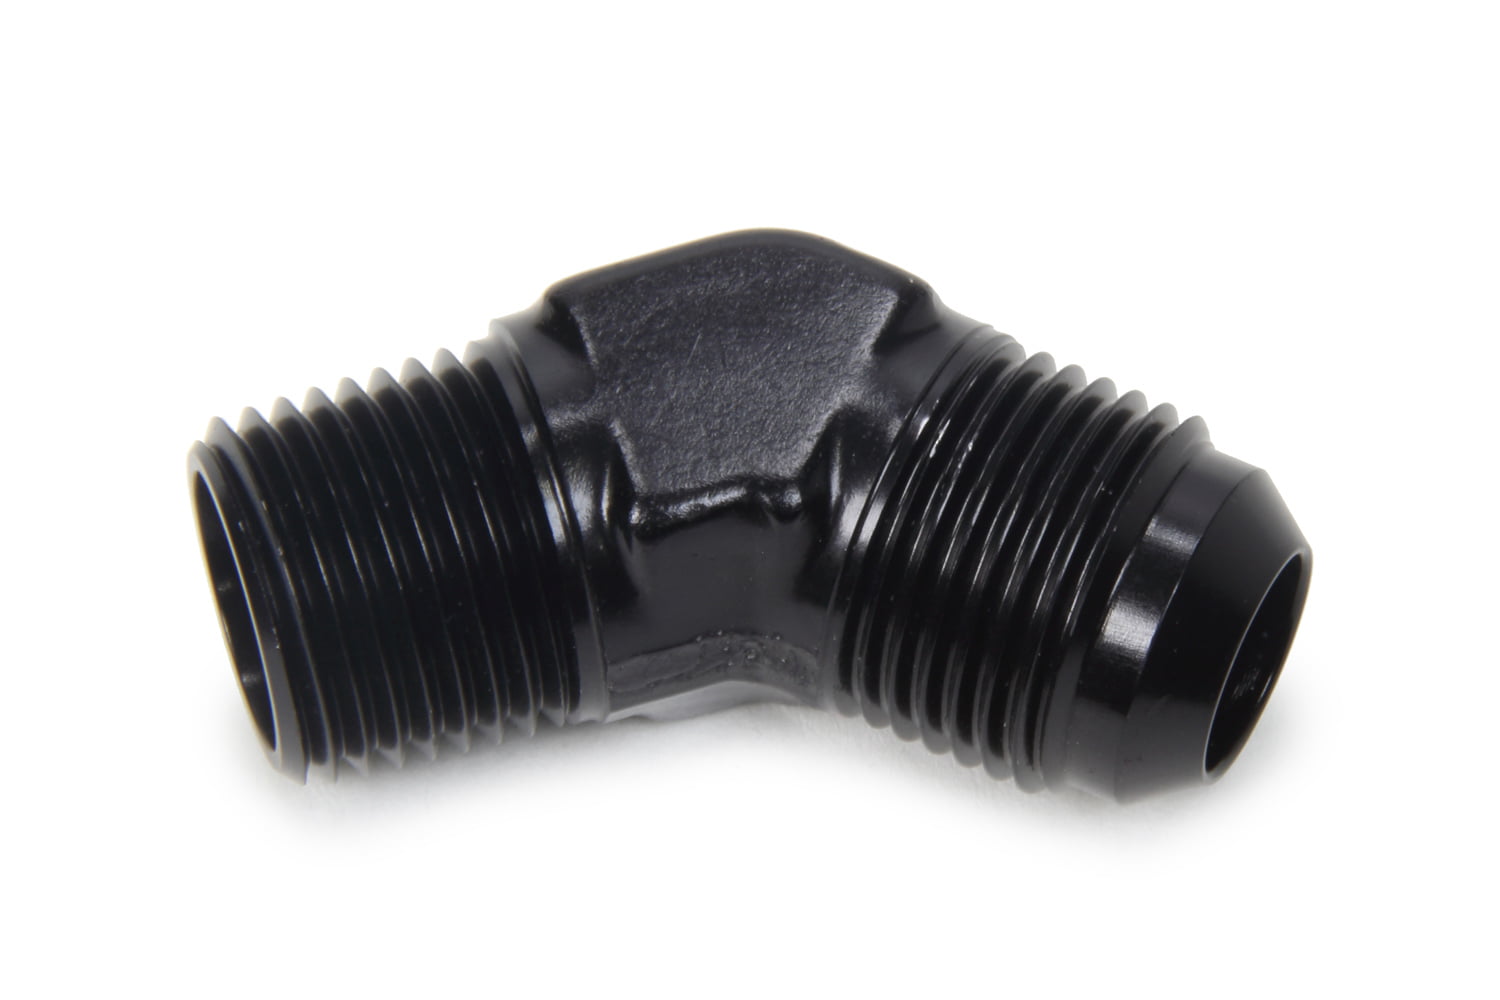 45 Degree Adapter 10 AN to 1/2 NPT Fitting Black 10an